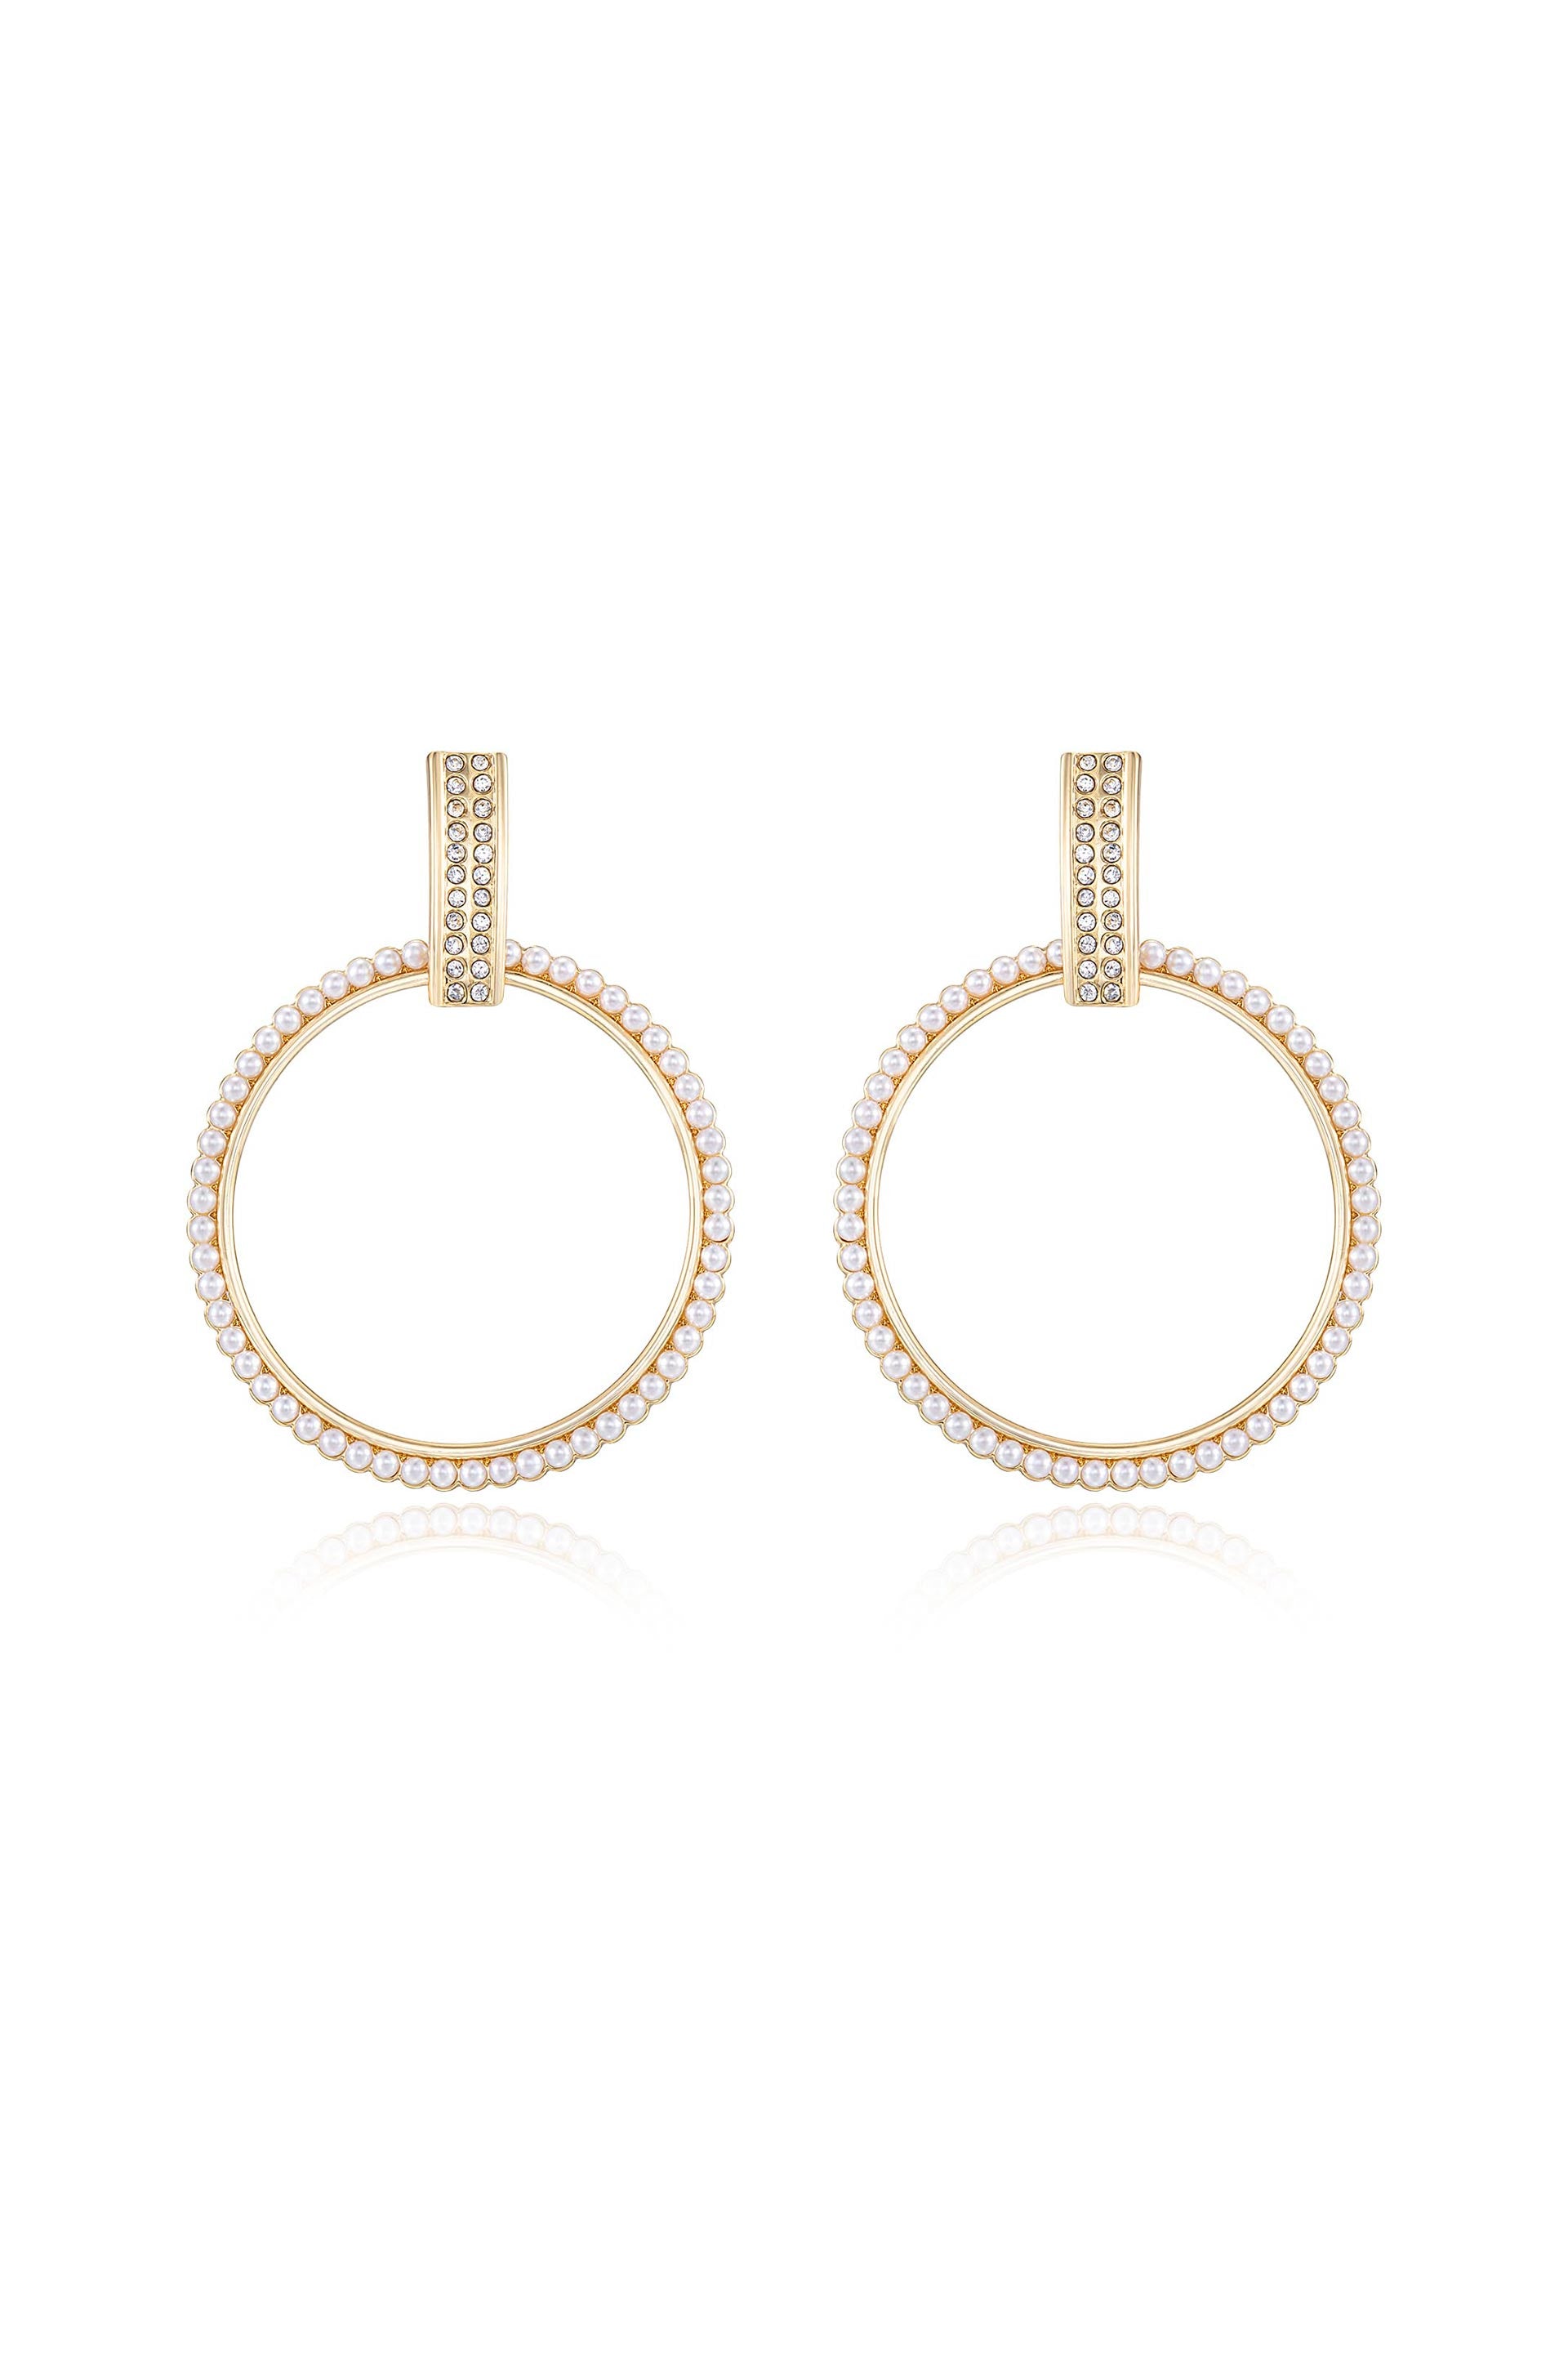 Classic Crystal Round Earrings